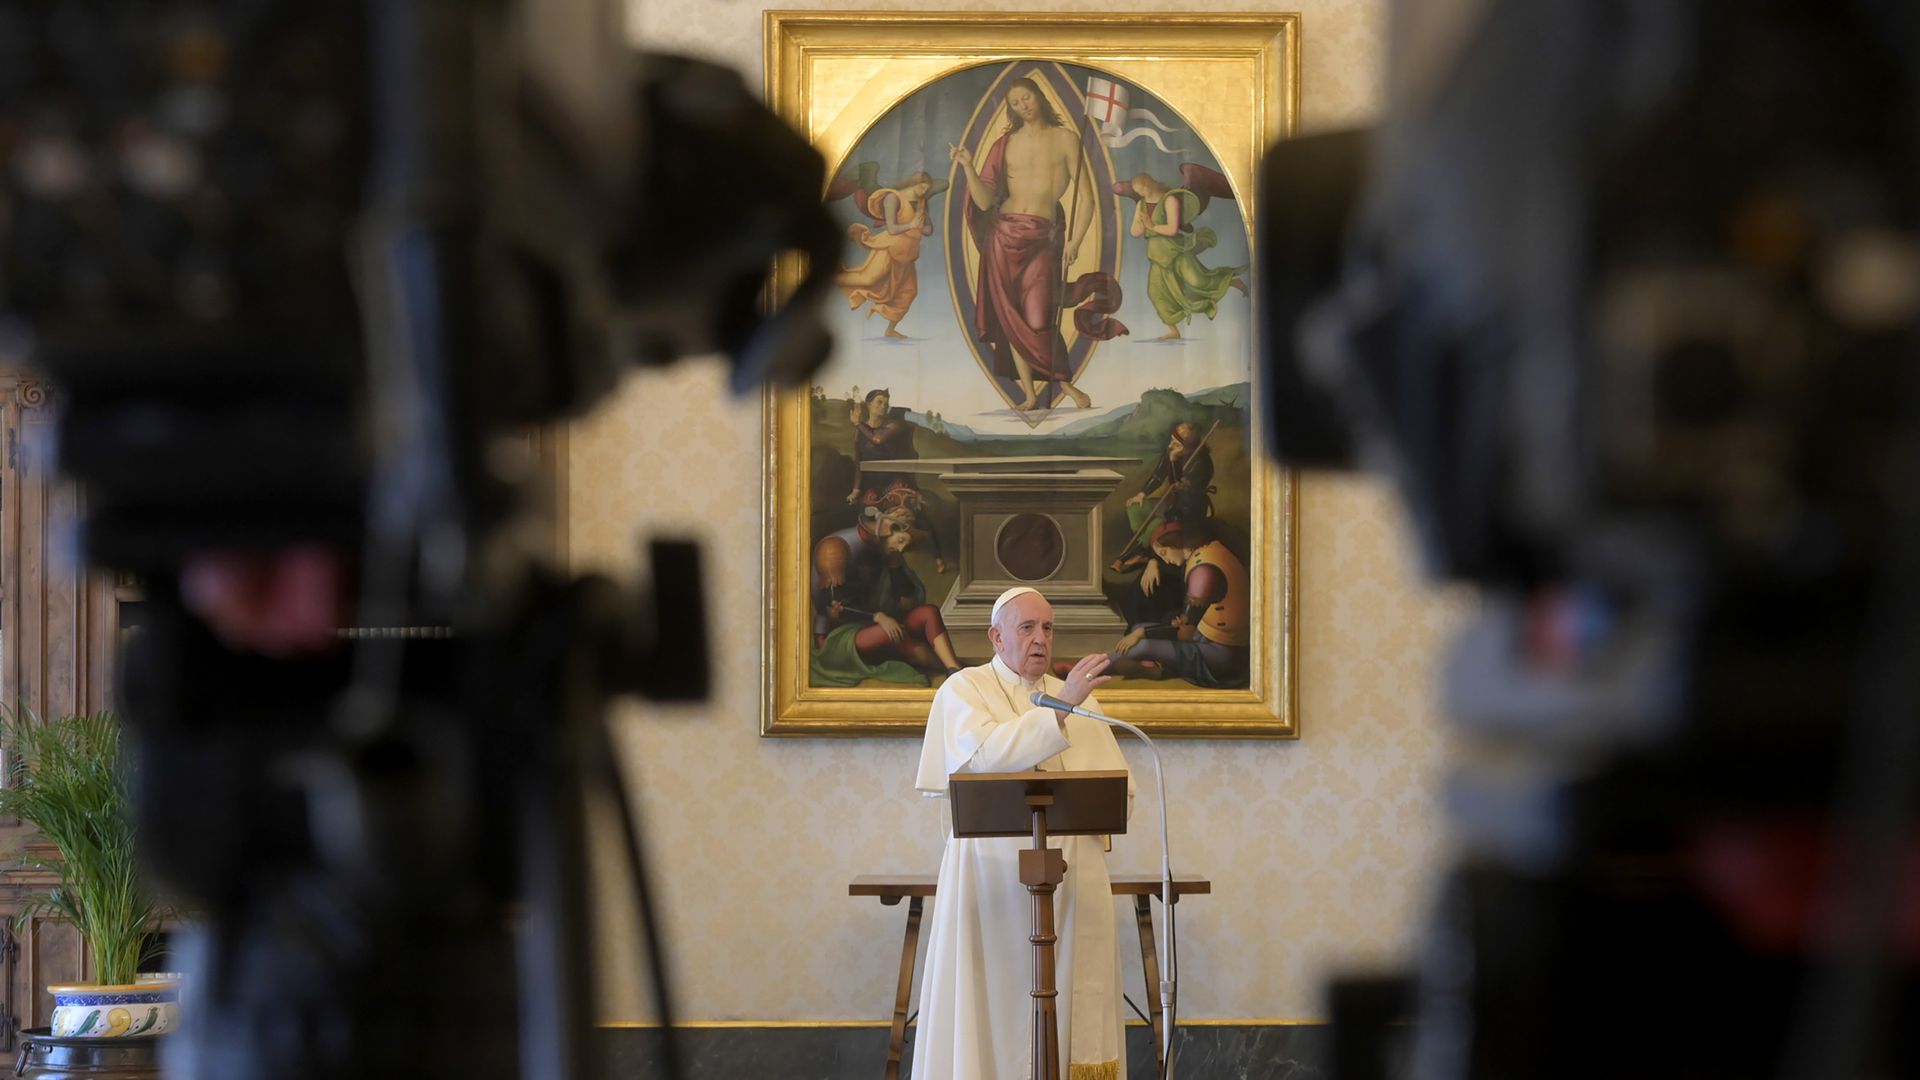 In this image, Pope Francis stands and speaks in front of two cameras.